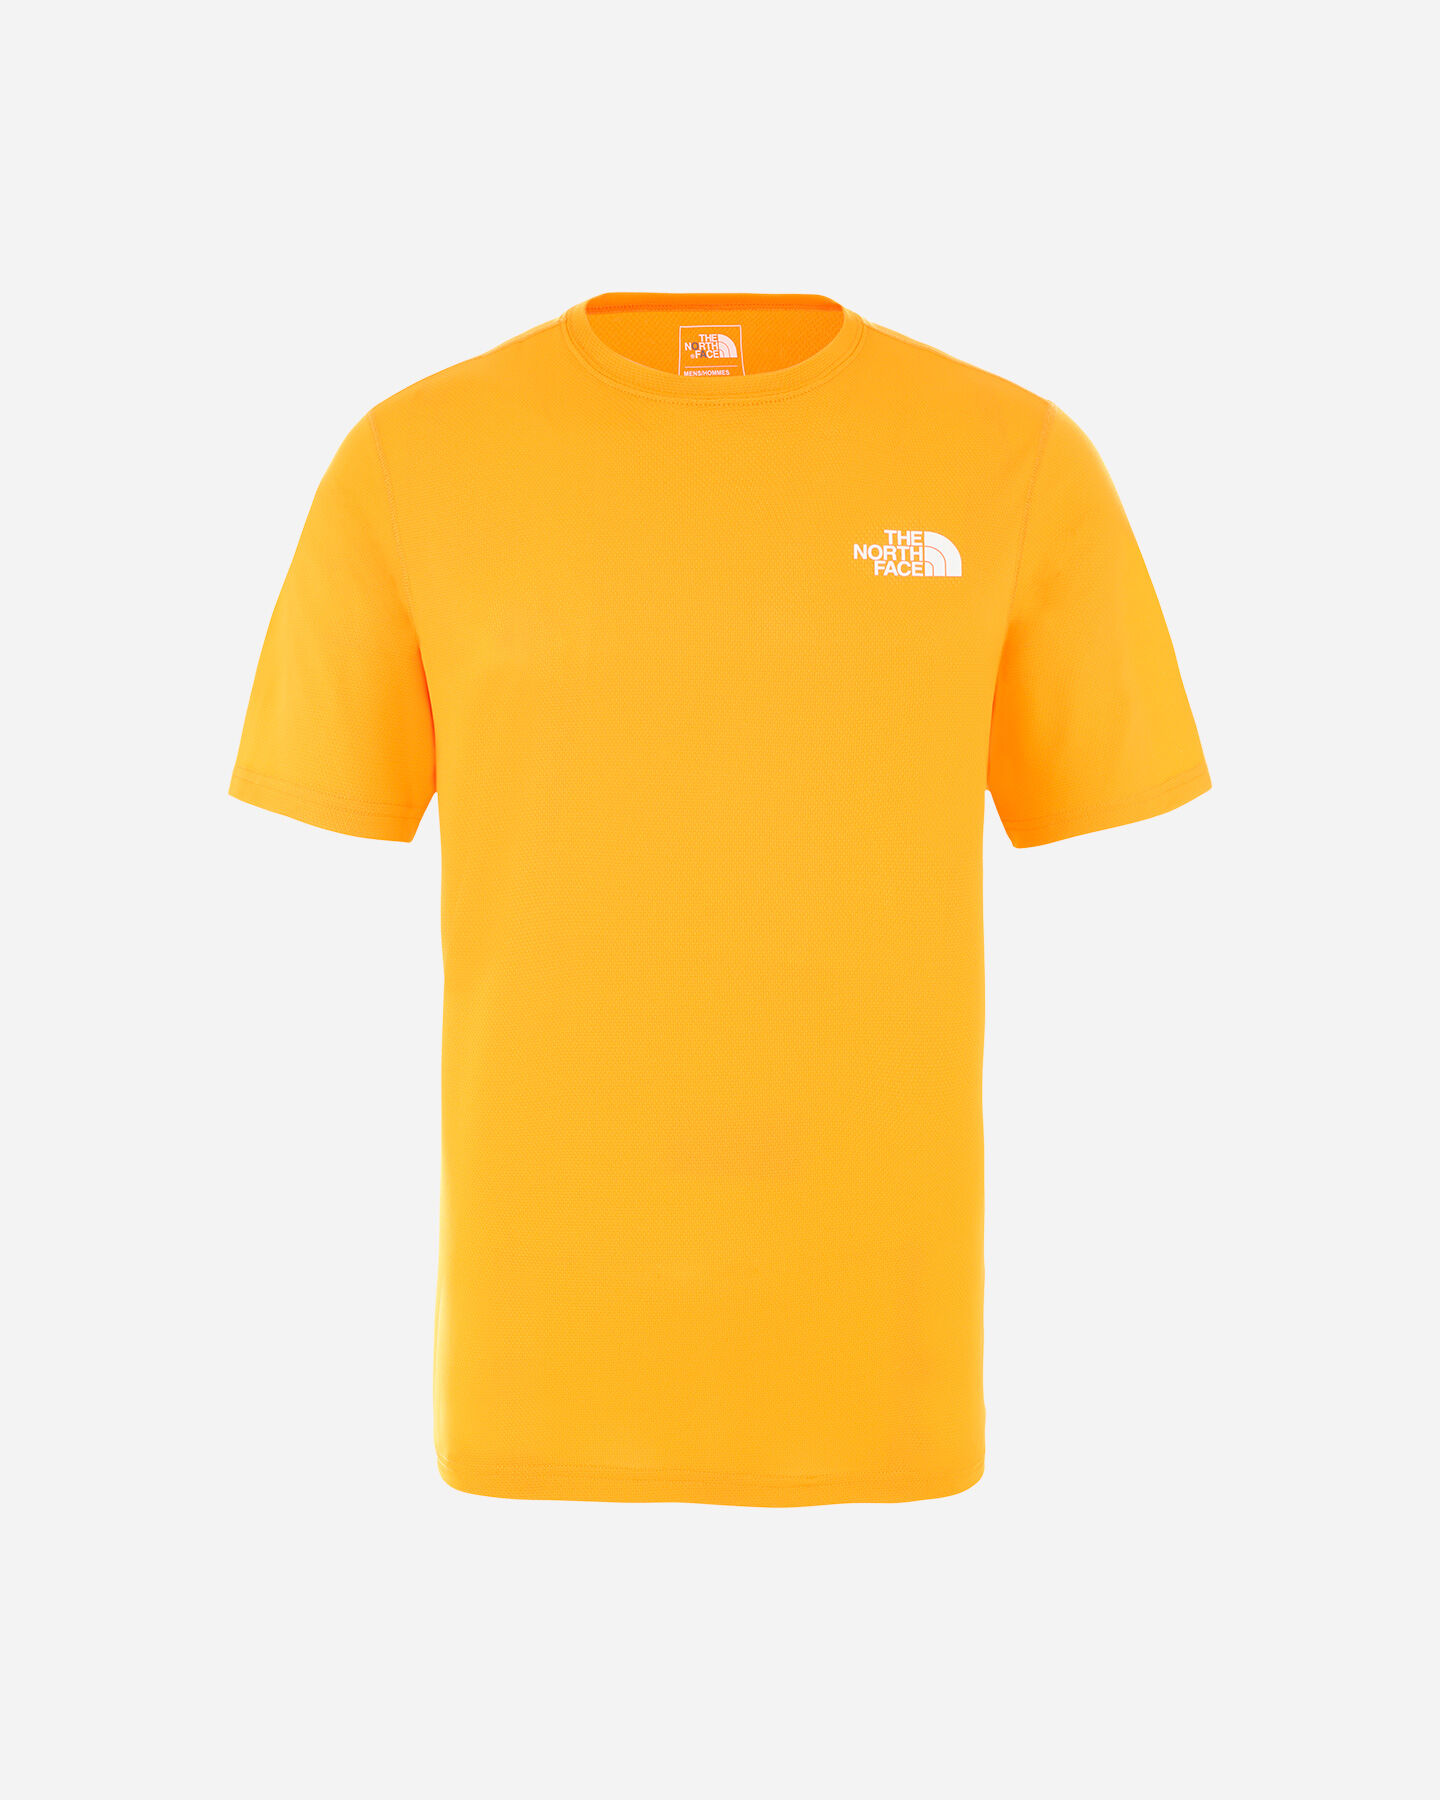  T-Shirt THE NORTH FACE FLEX II M S5192889|ECL|S scatto 0